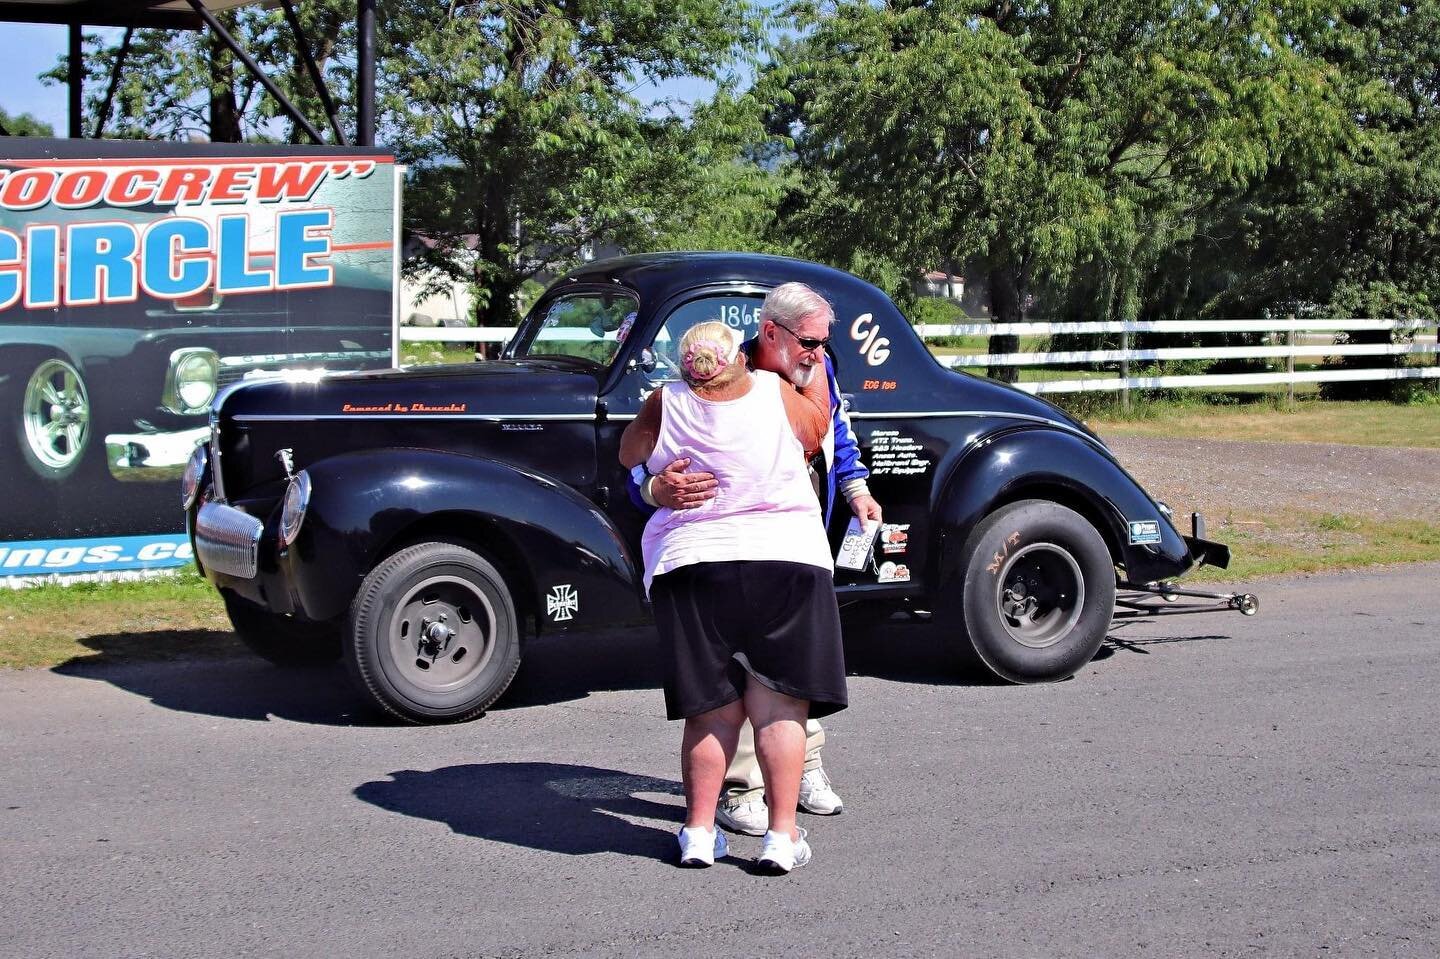 Our race at Maple Grove was called off today, so we figured we could all use one of Ethel&rsquo;s famous hugs from @beaverspringsdragway! 🤗 

Happy weekend y&rsquo;all and see ya Aug. 27-28th at US 13 Dragway in DE! 🏁

#eastcoastgassers #dragracing